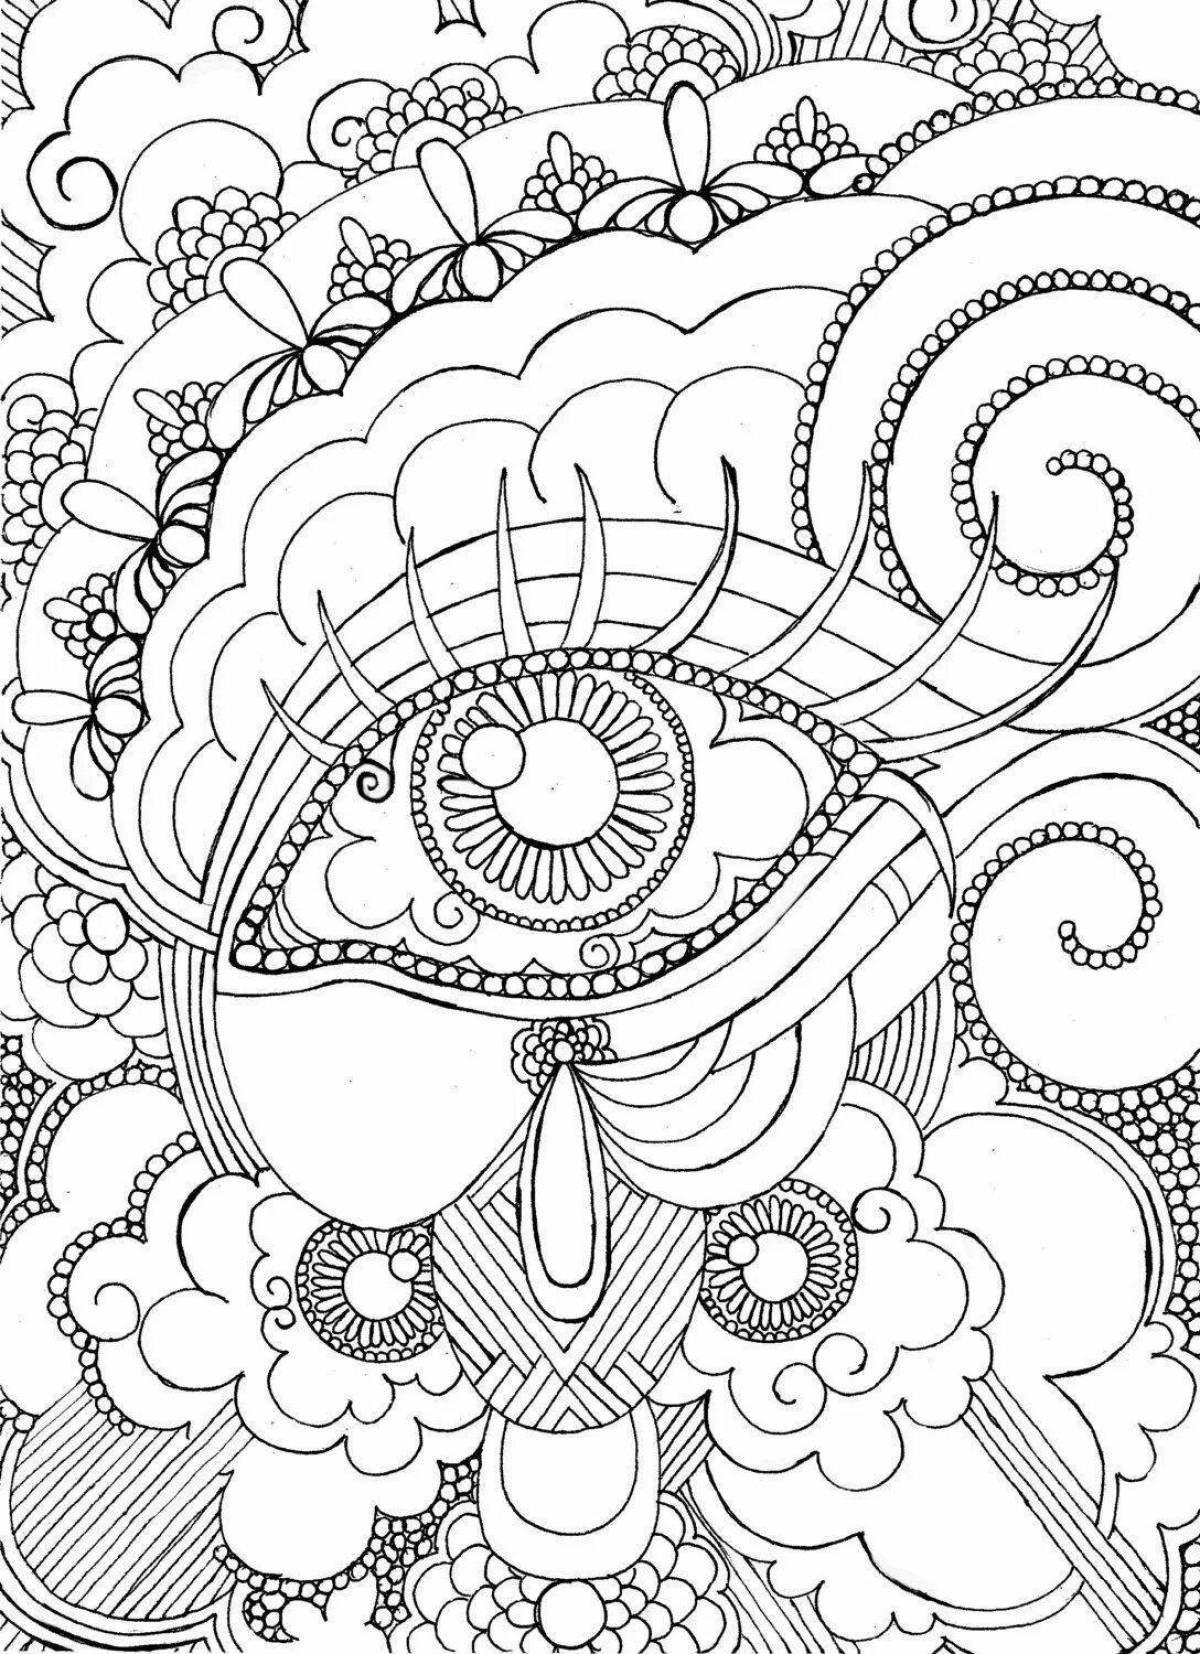 Soothing coloring book for children